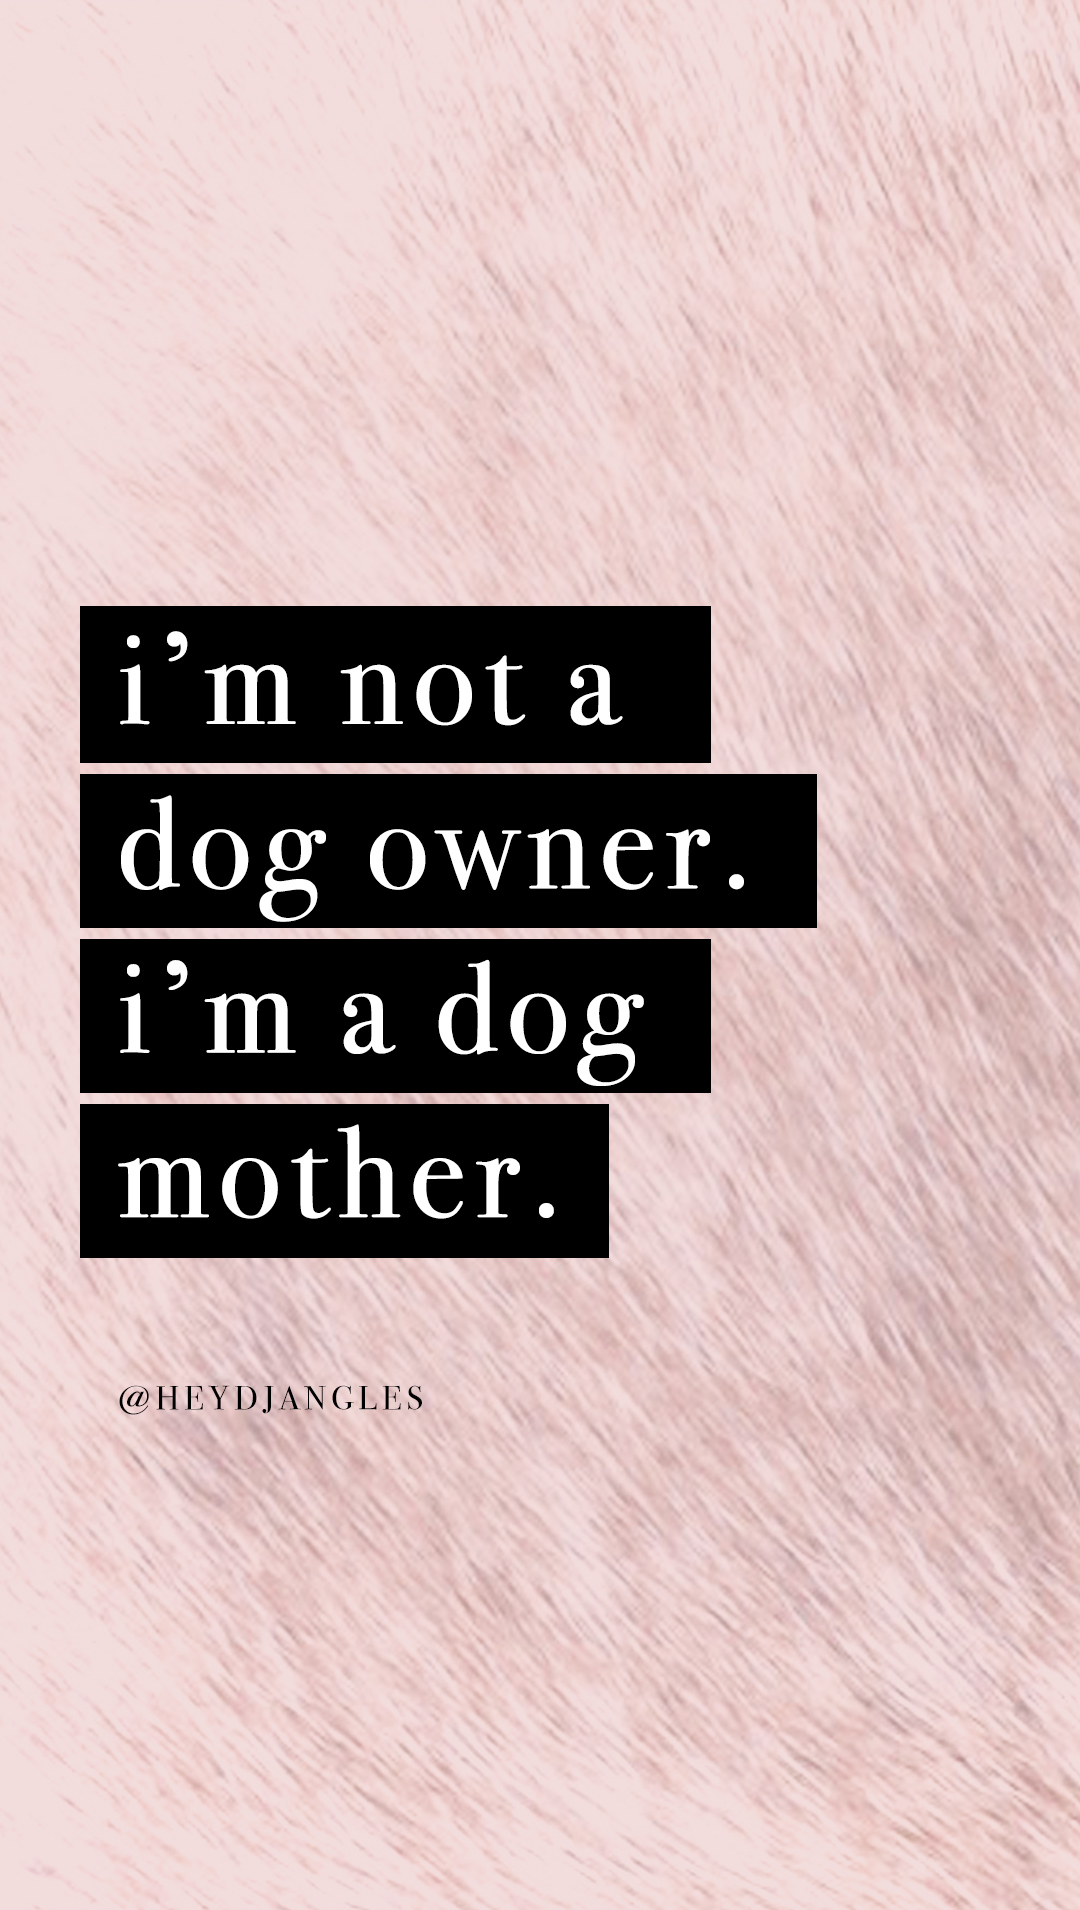 Cute Dog Quote Wallpaper For Iphone Or Android, Im - Dog Mom Iphone - HD Wallpaper 